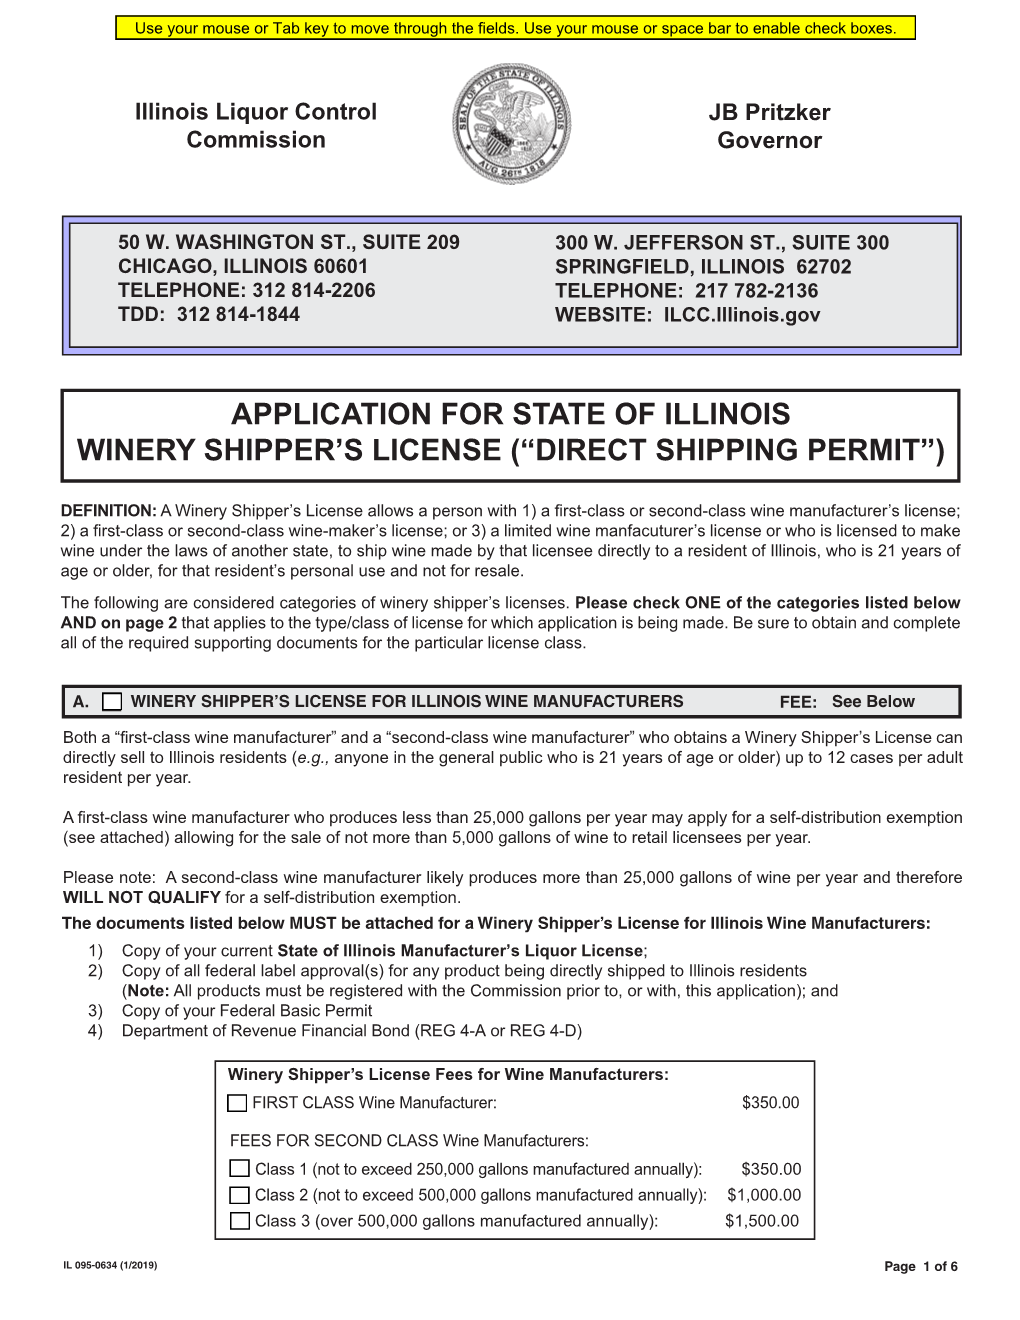 Winery Shipper's License Application